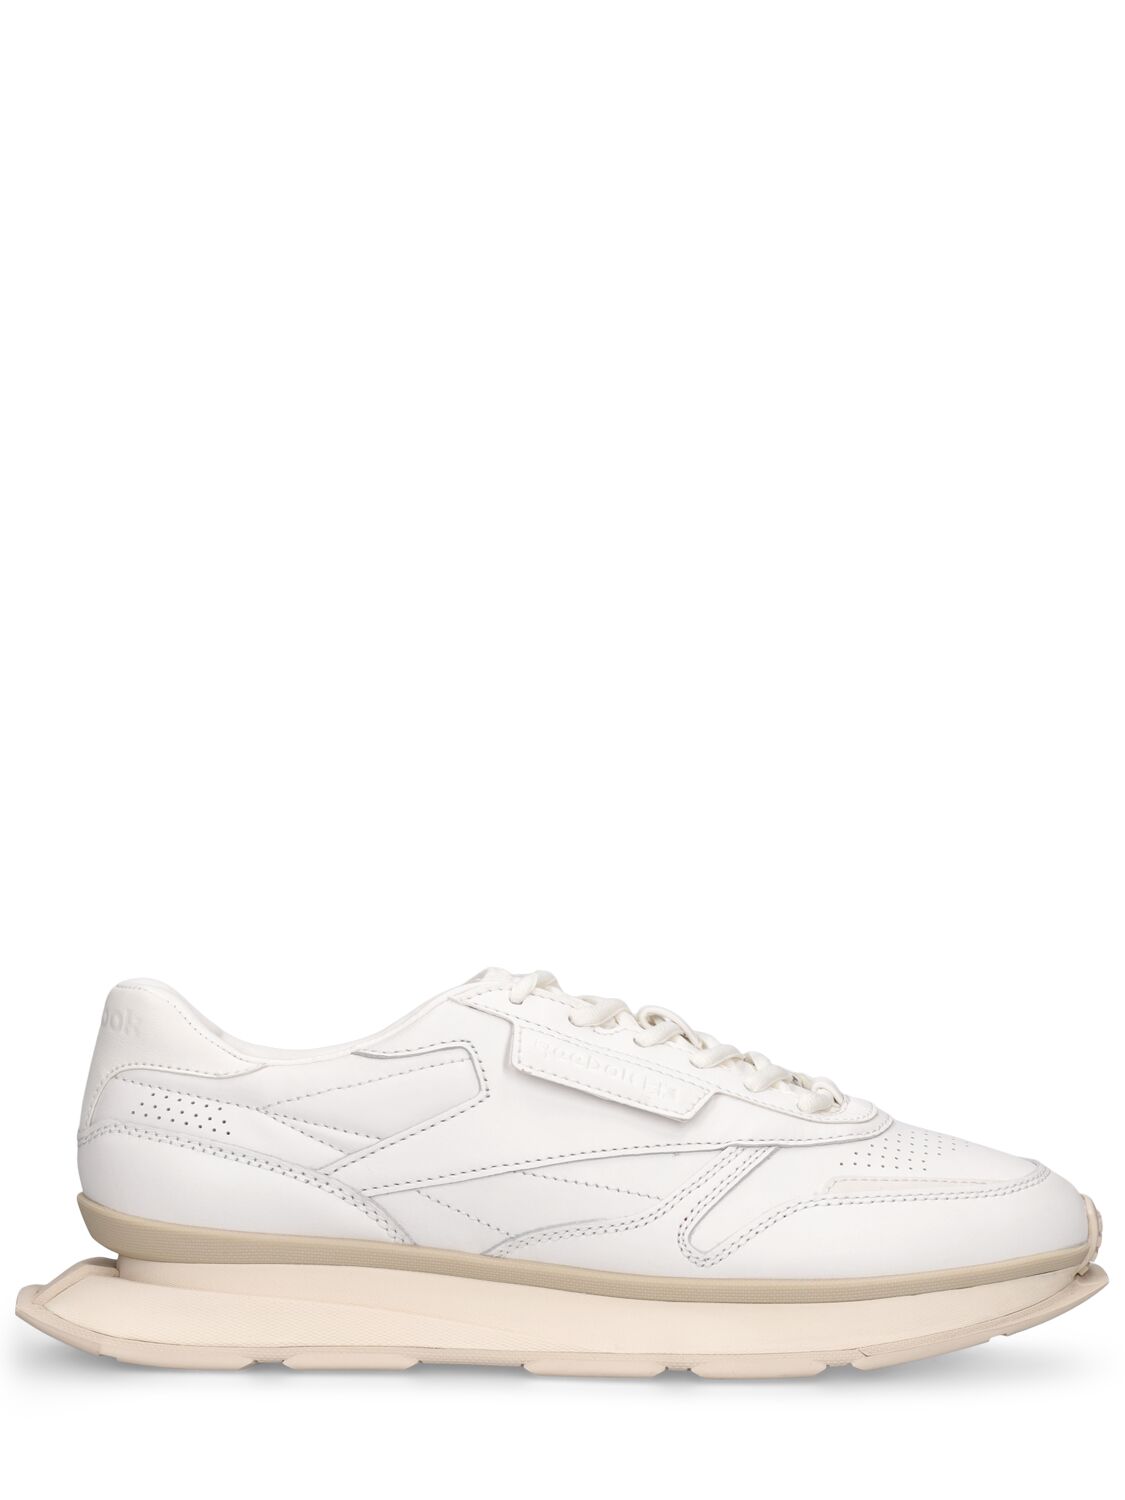 Image of Classic Ltd Leather Sneakers